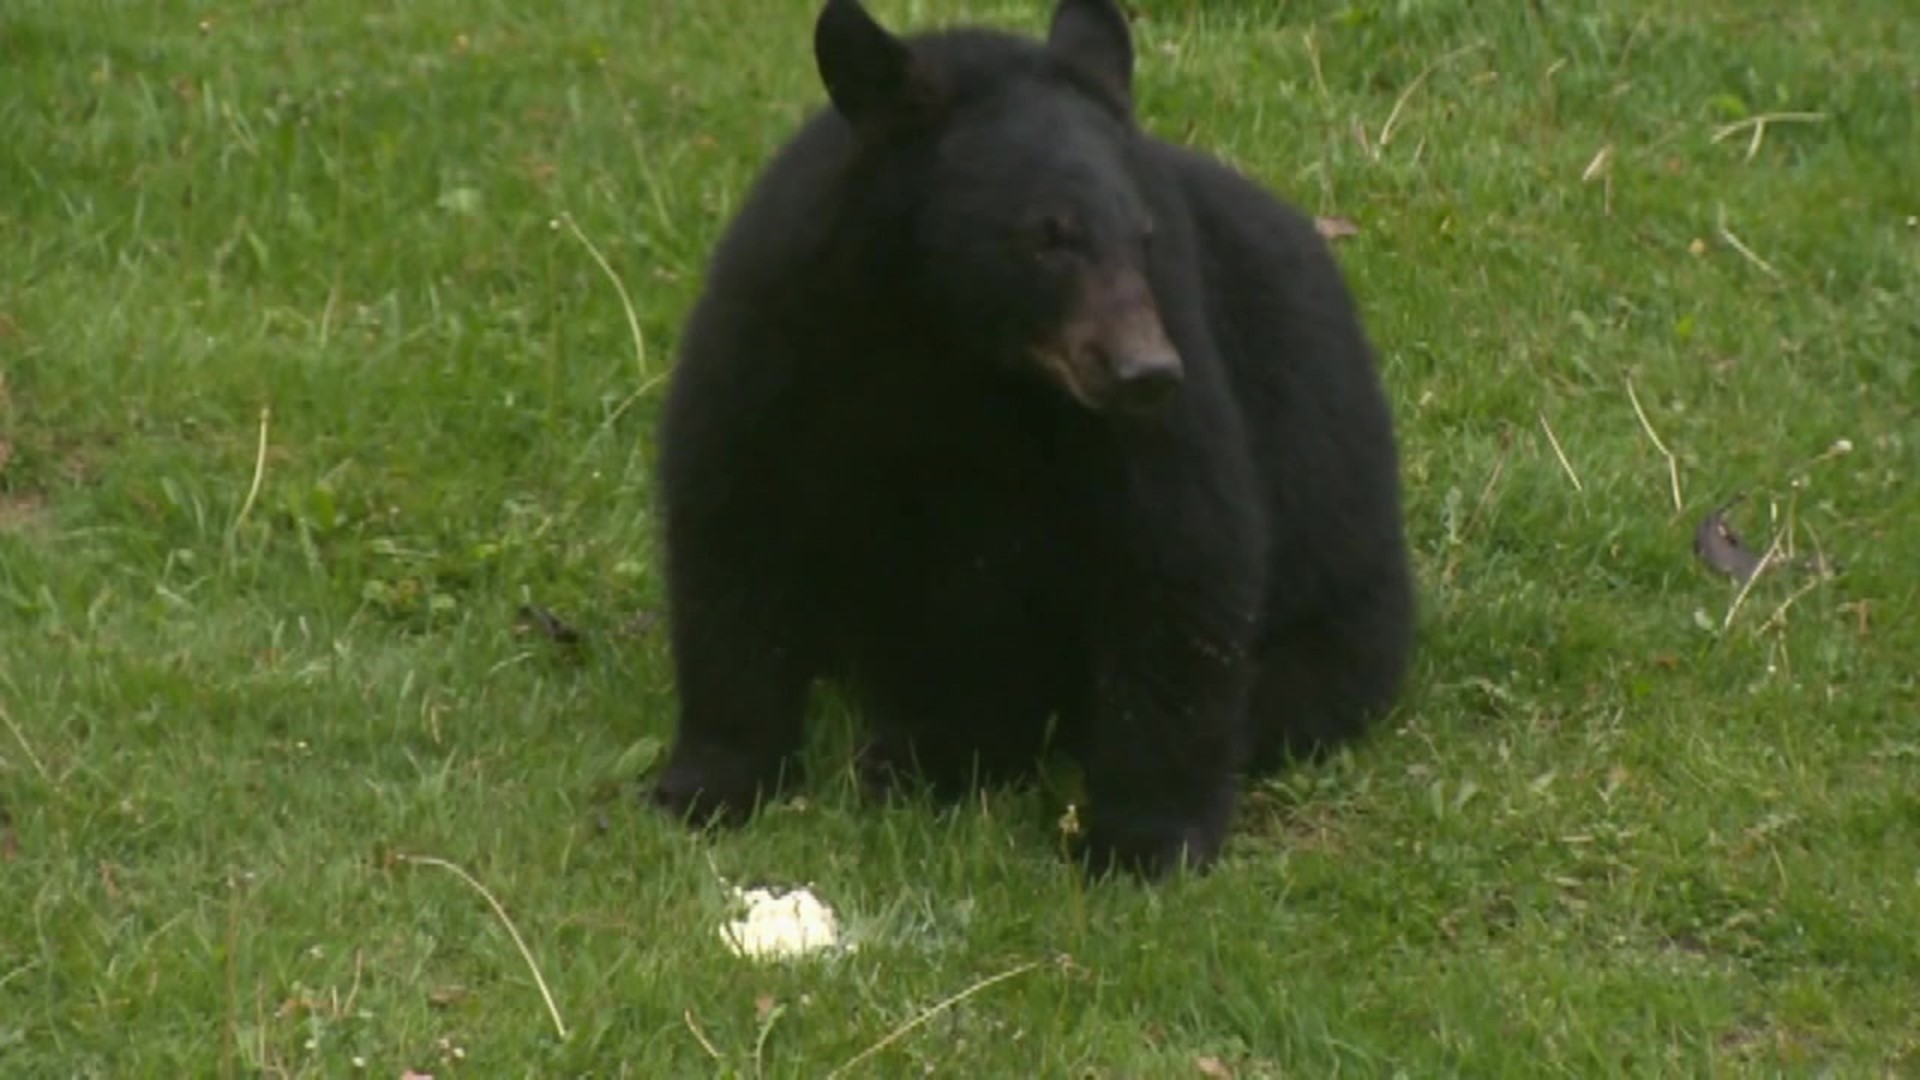 Wildlife experts say a lack of food is what is bringing bears out to neighborhoods and other public places.